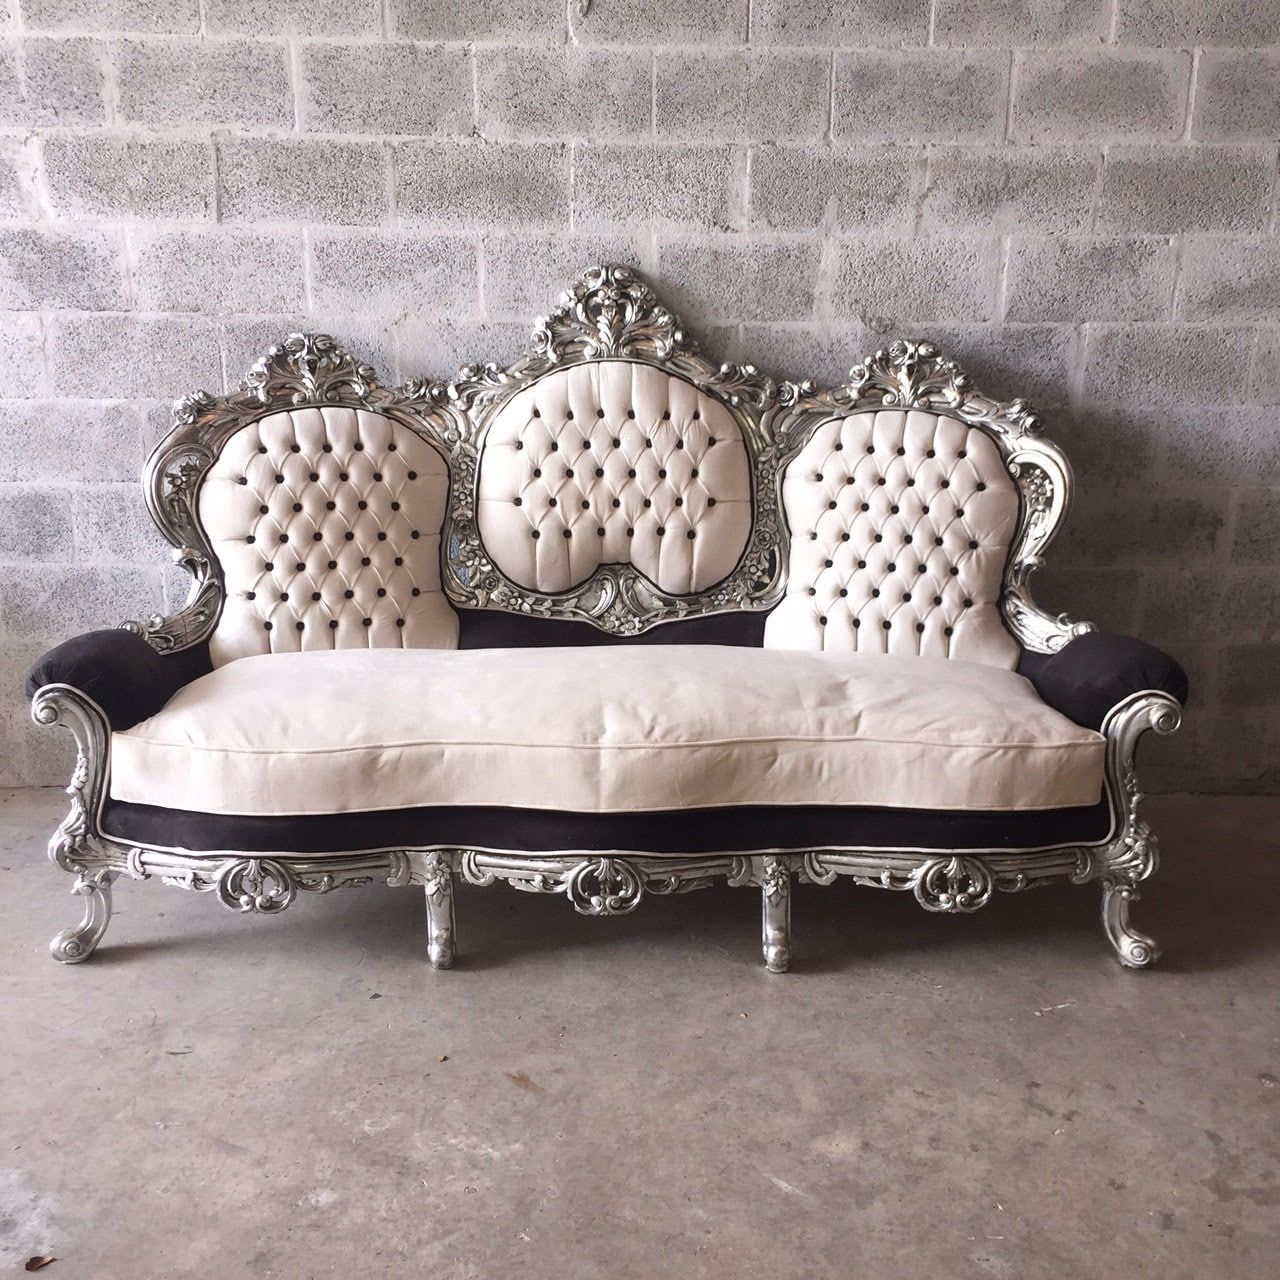 Tufted Settee Rococo Furniture Sofa Antique Italian Throne In 4Pc French Seamed Sectional Sofas Velvet Black (View 1 of 15)